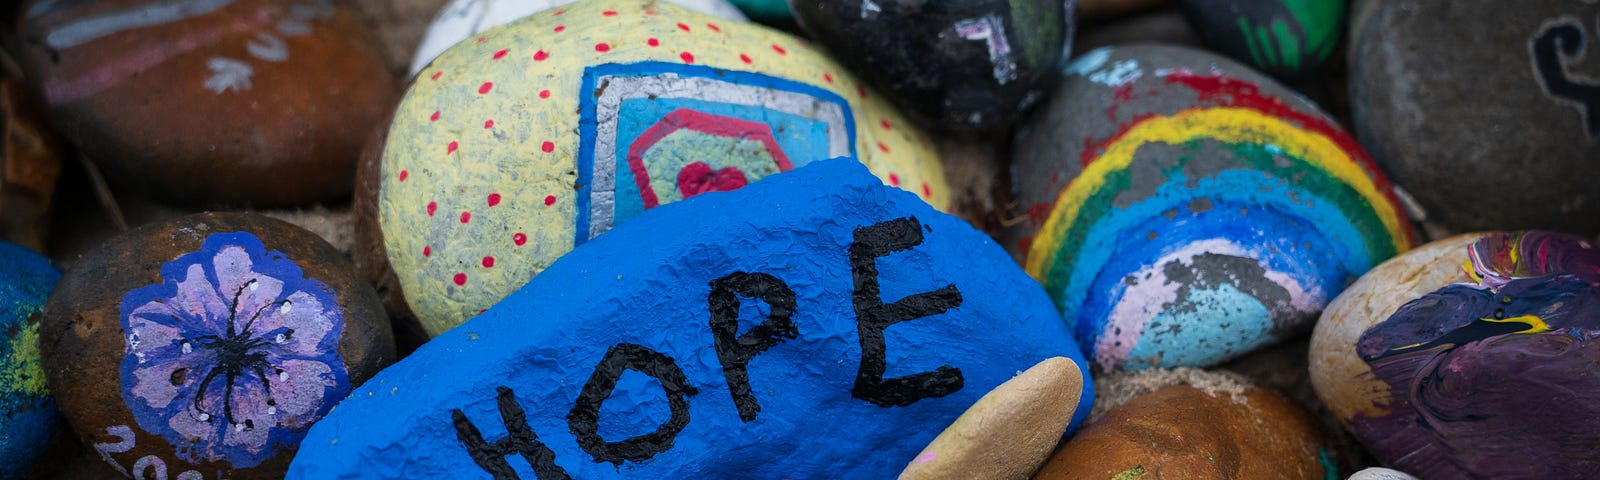 painted rocks in a pile, blue rock painted with hope, exploration of personal growth and letting go of past hurts